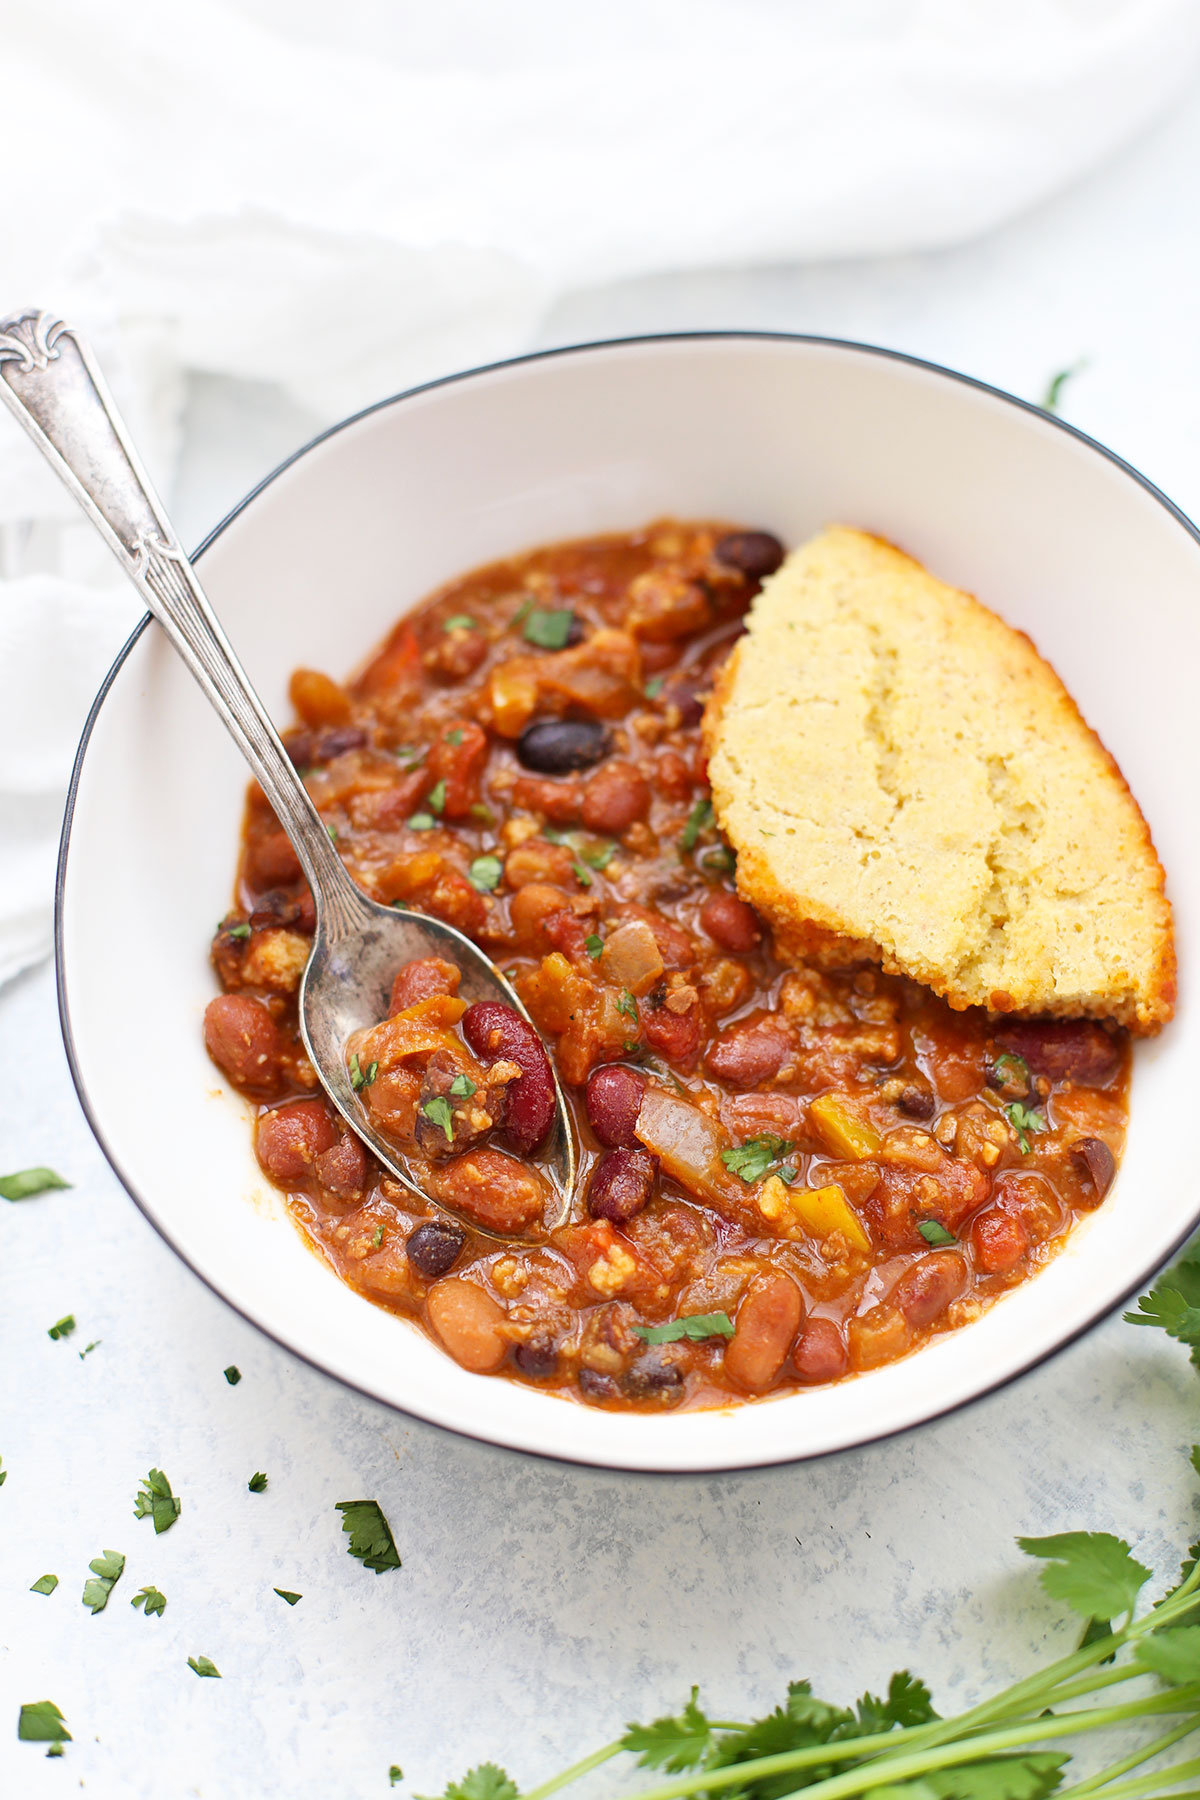 Front view of chili and cornbread in a bowl, with a spoon